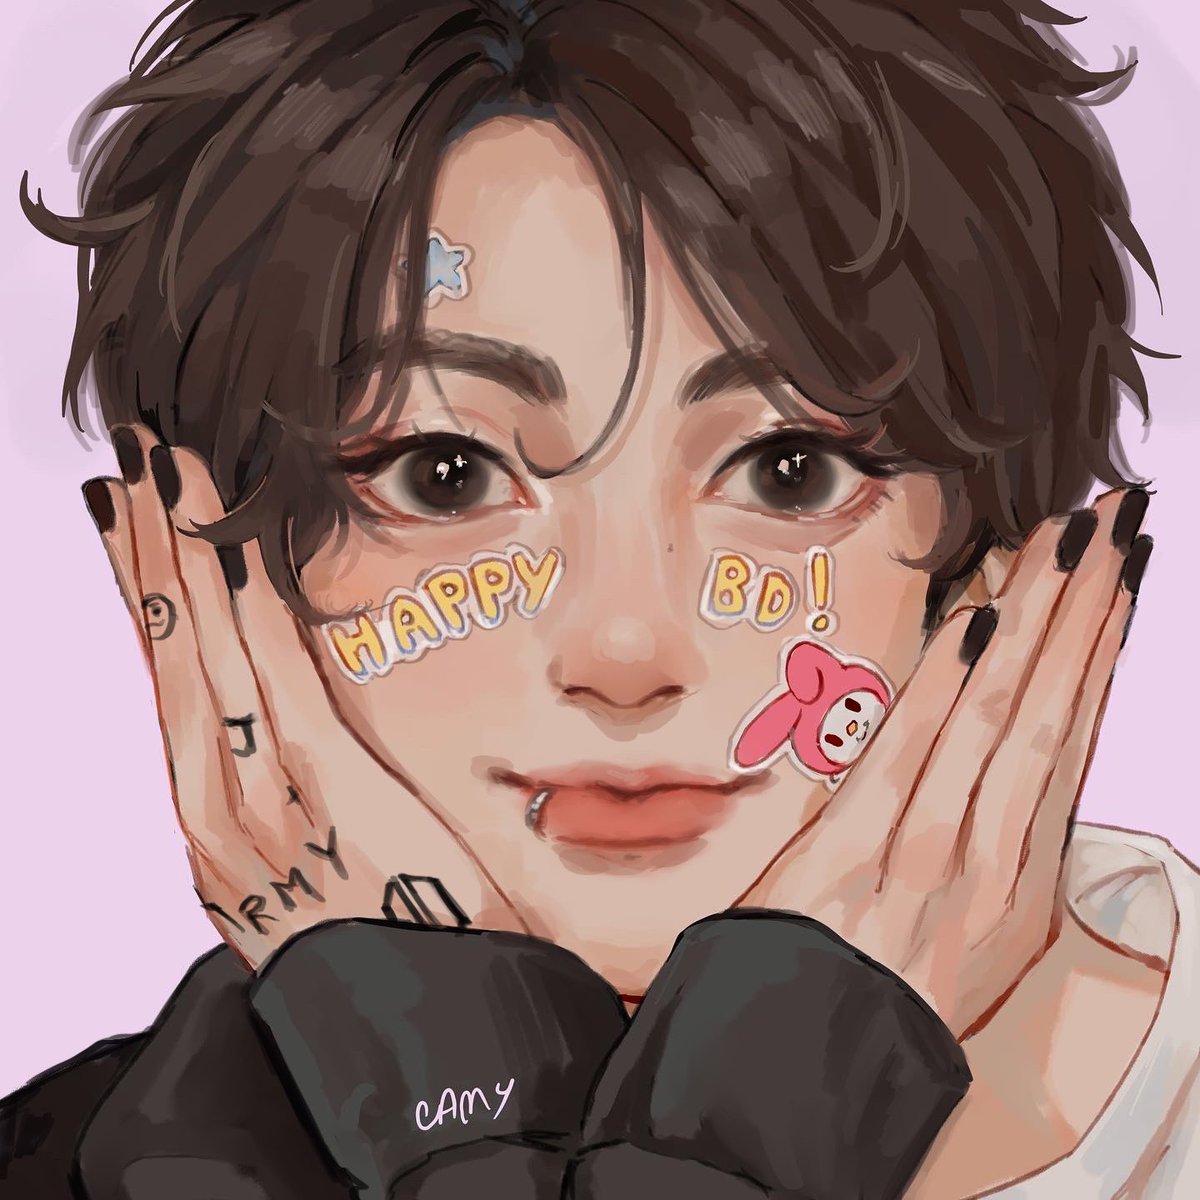 「omg i'm obsessed with pink and jungkook 」|camy 🌙のイラスト